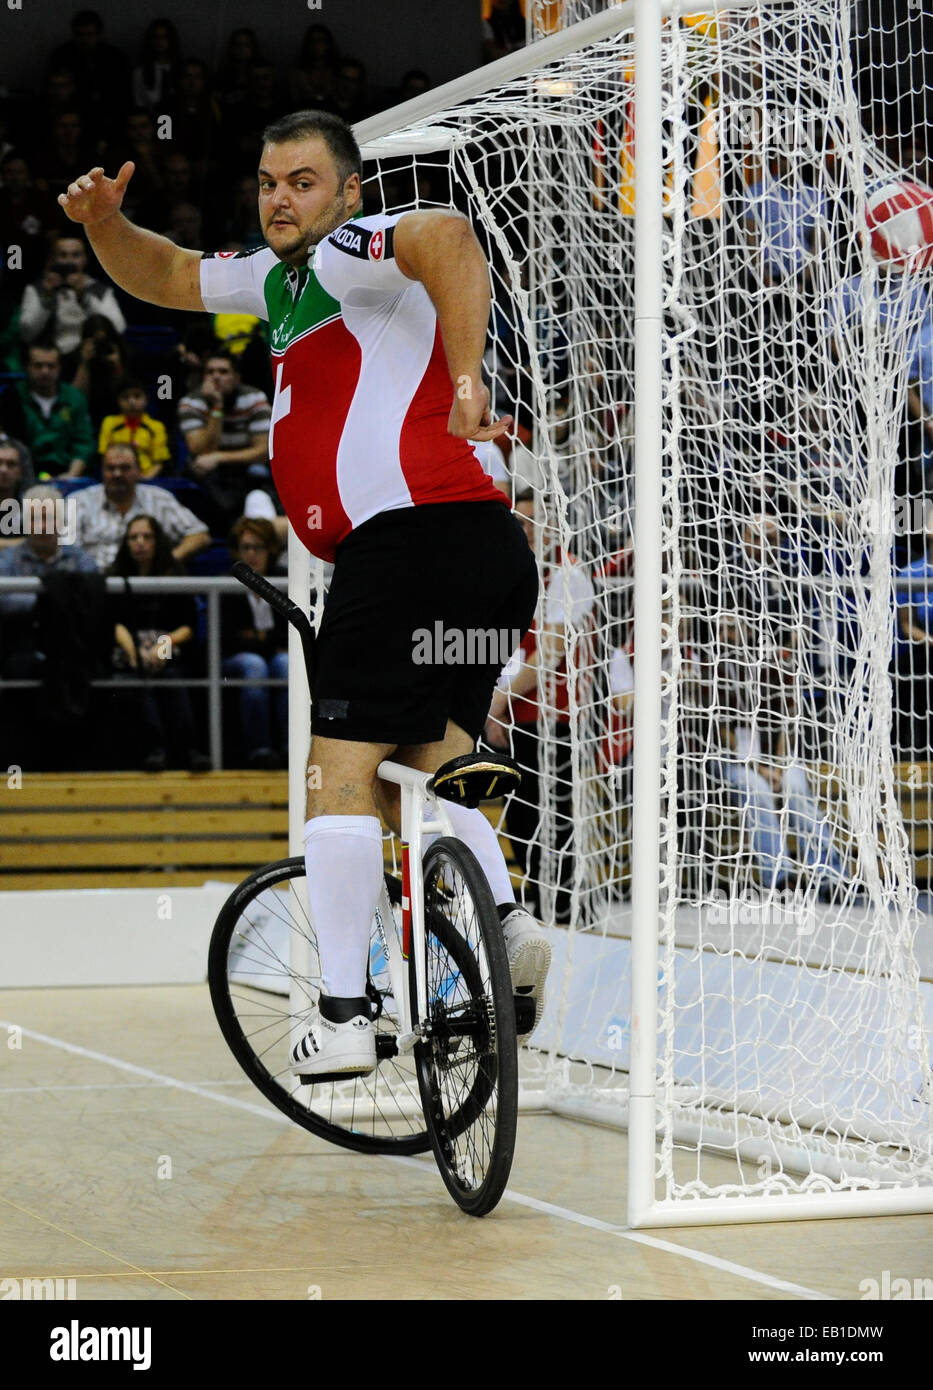 Brno, Czech Republic. 23rd Nov, 2014. Roman Schneider of Schwitzerland pictured during the Cycle Ball final at the Indoor Cycling World Championships 2014 in Brno, Czech Republic, November 23, 2014. © Vaclav Salek/CTK Photo/Alamy Live News Stock Photo